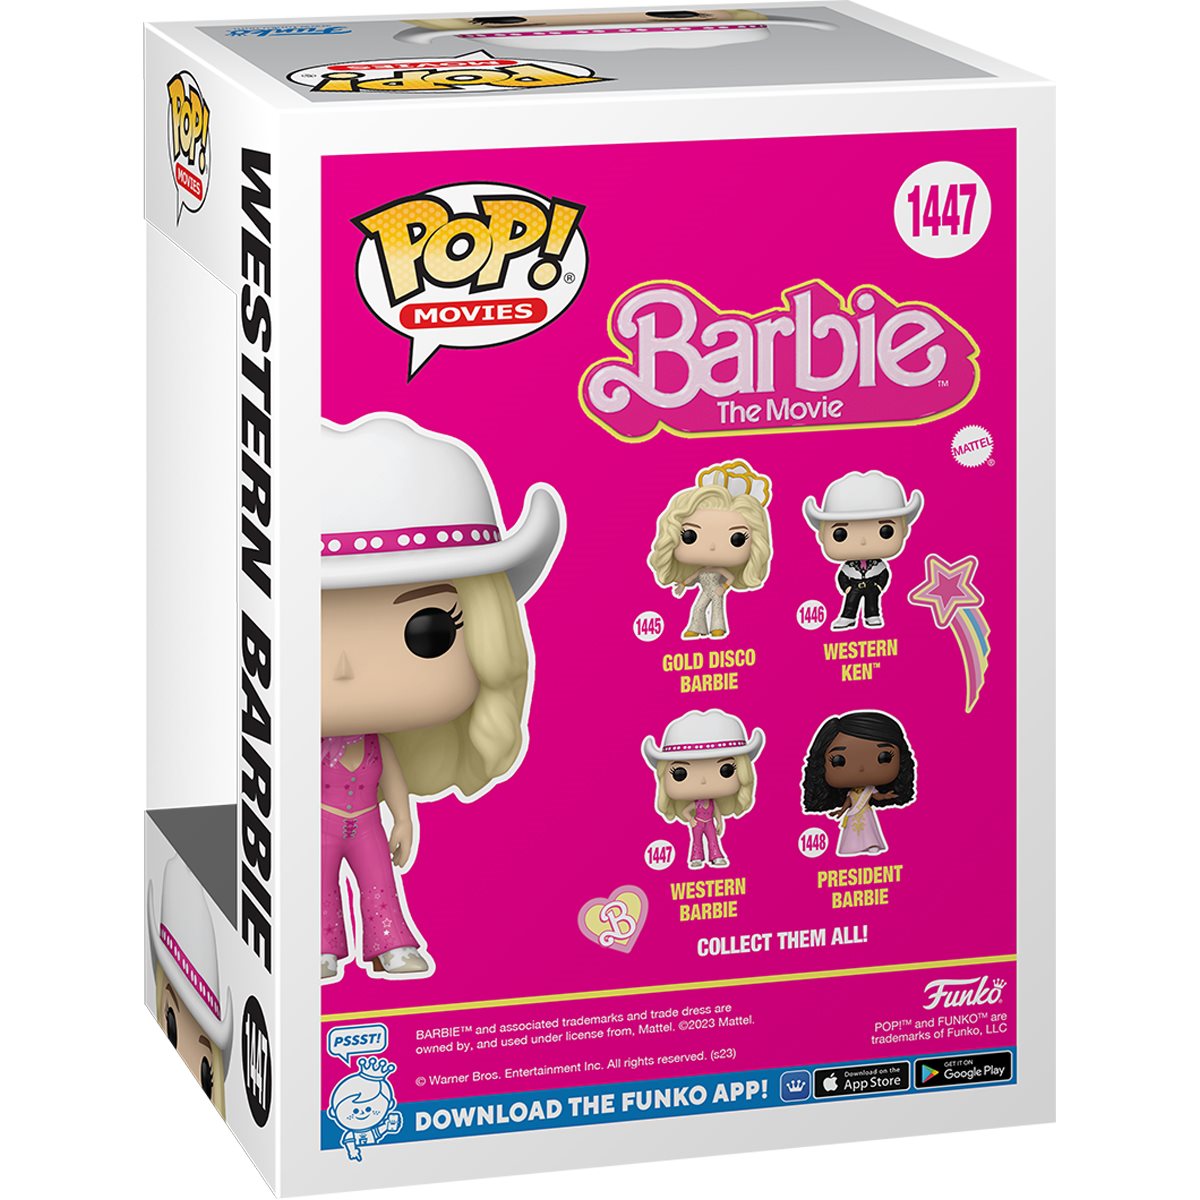 Barbie' Funko Pop! Figures Are Available For Pre-Order — Get Yours Now